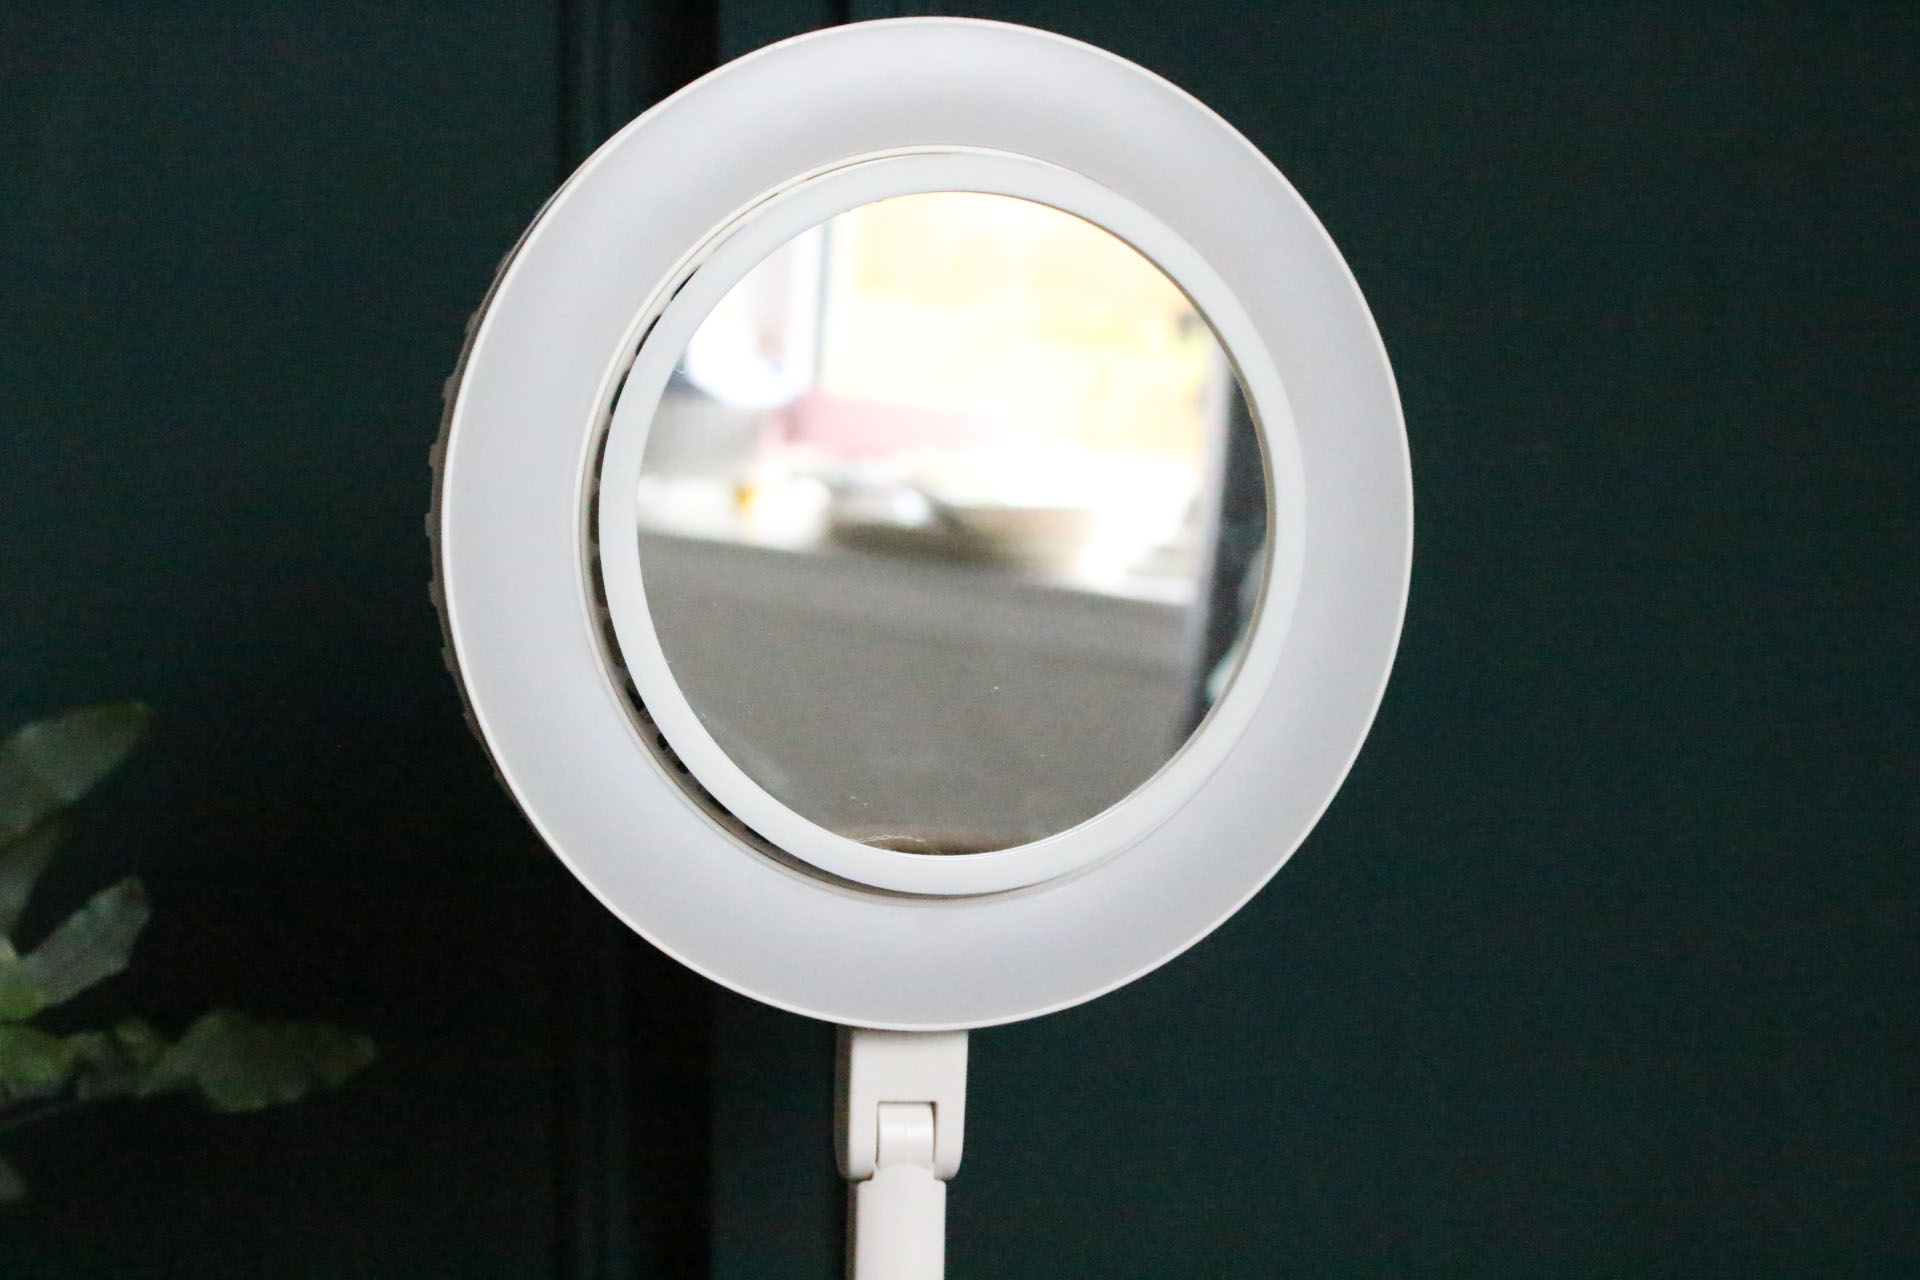 Ablaze 3x Magnifying Makeup Mirror with LED Ring Light – Sunlight Bathrooms